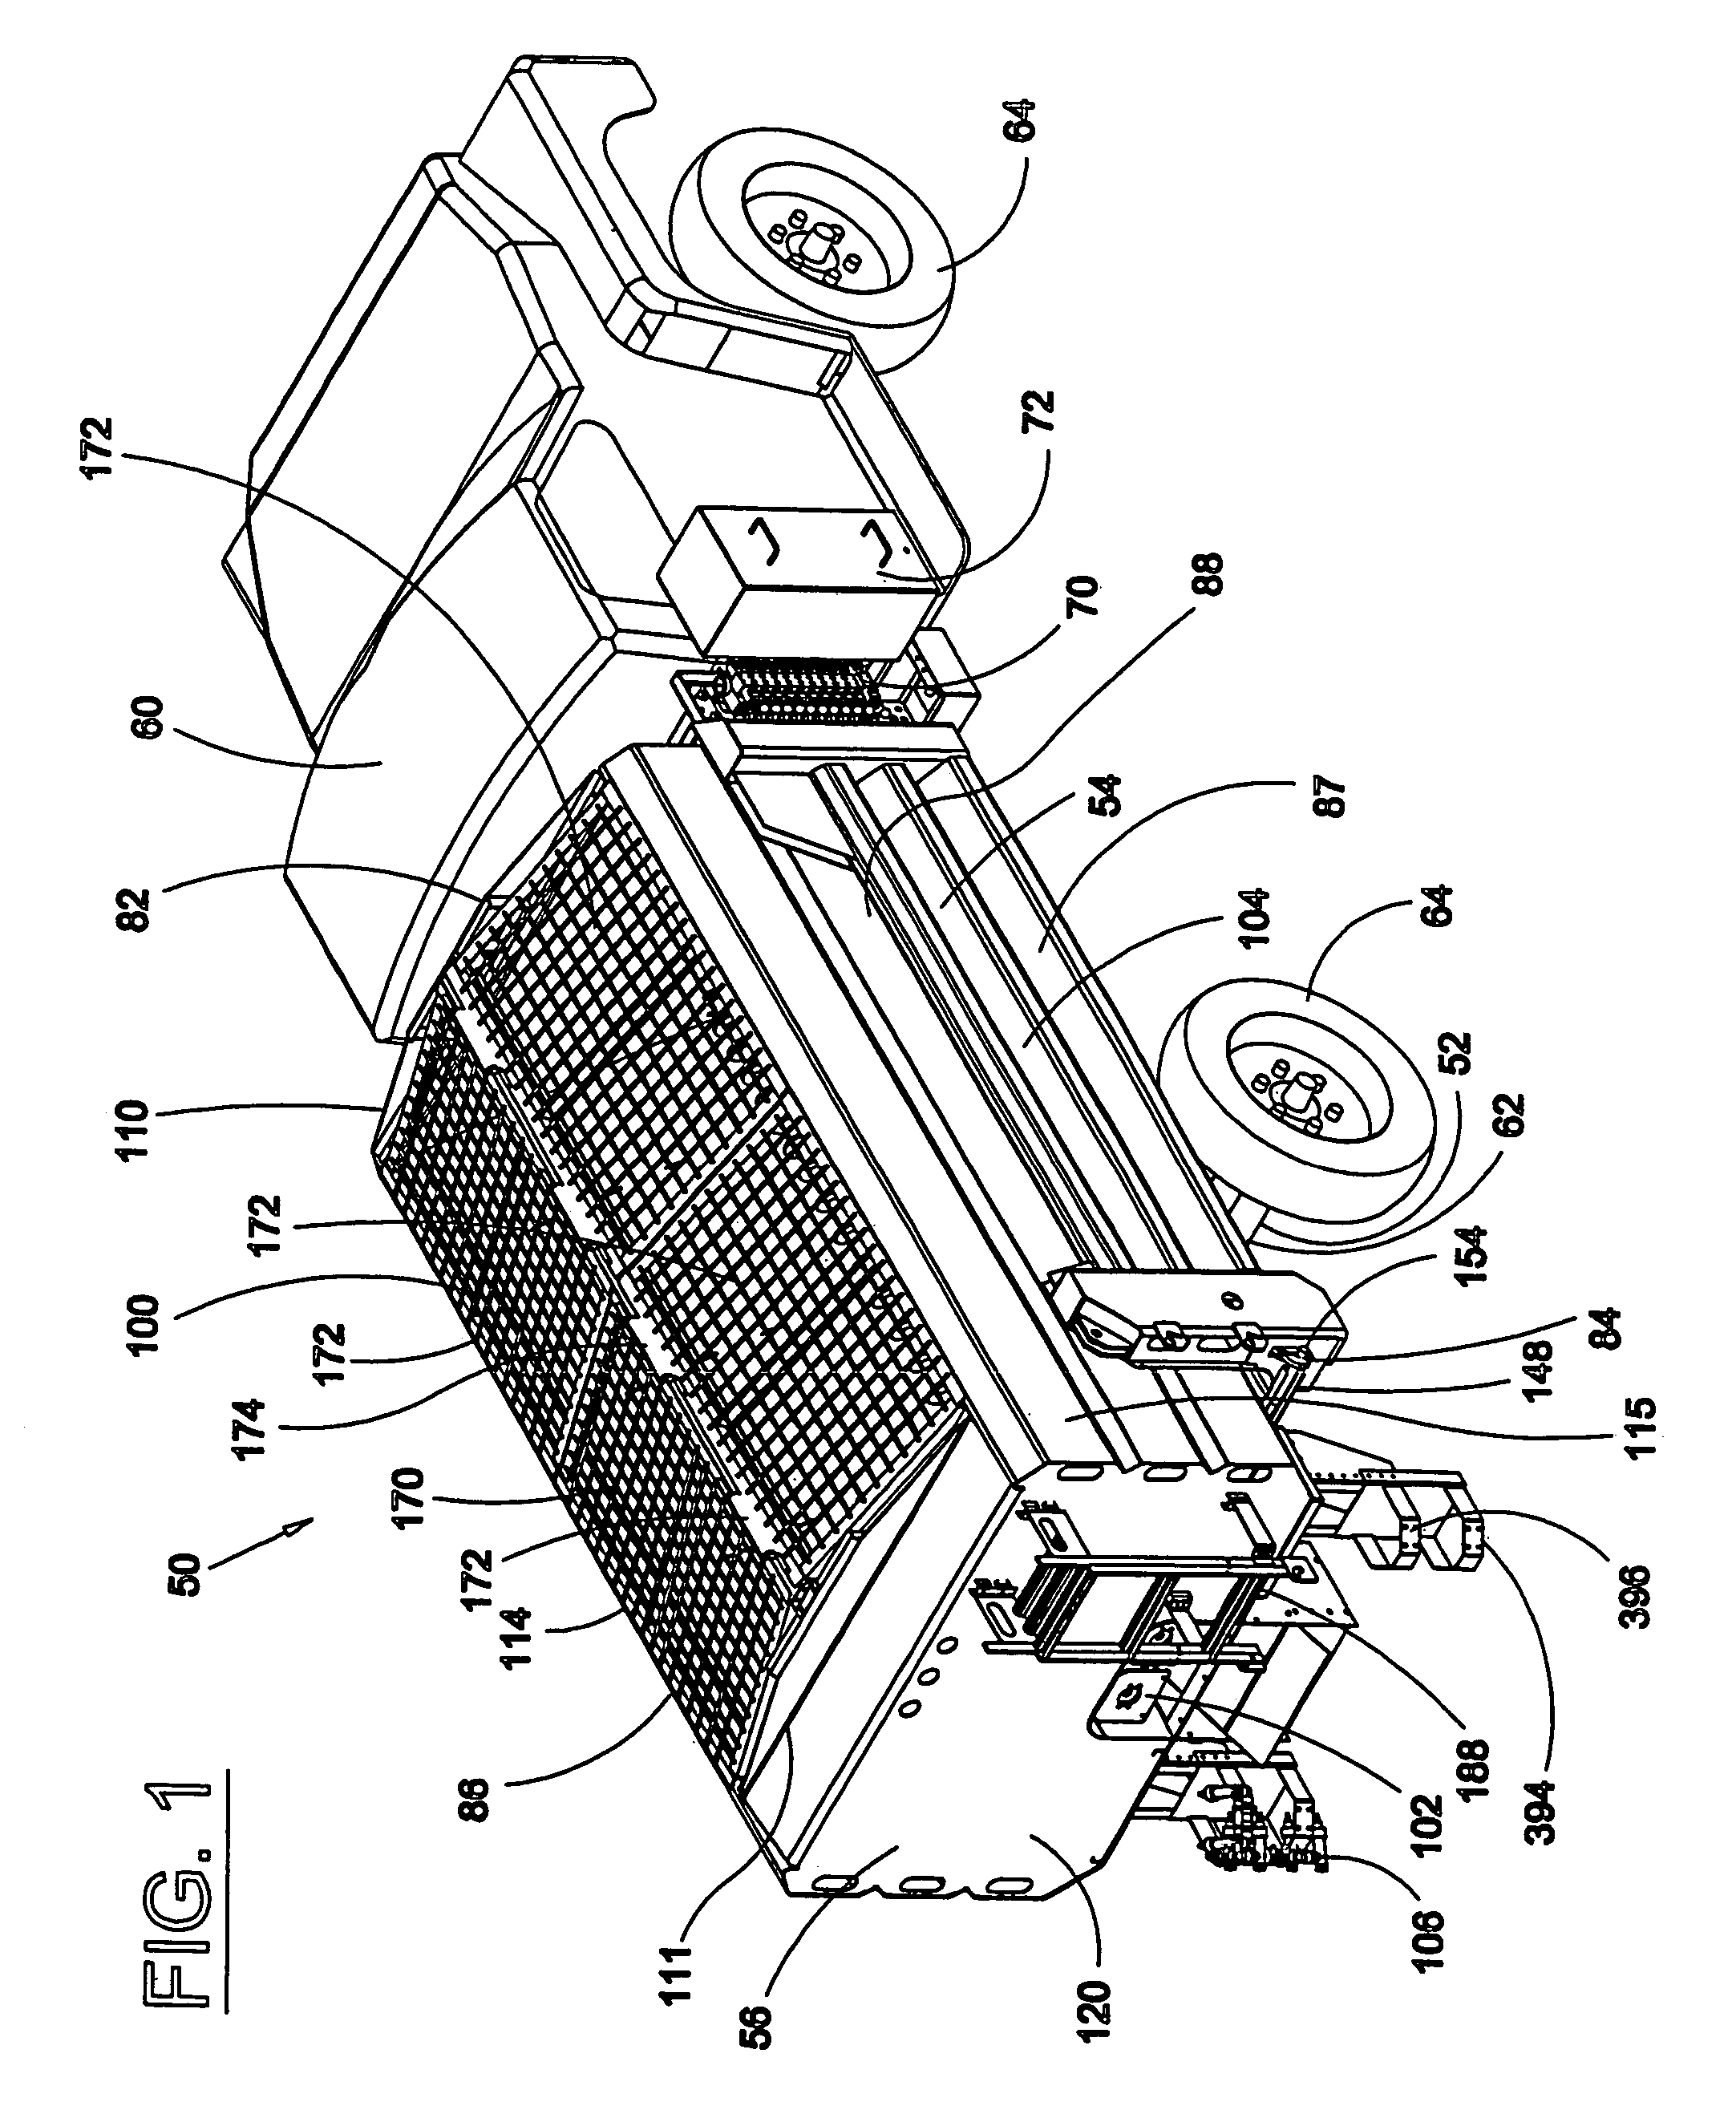 Apparatus for treatment of snow and ice